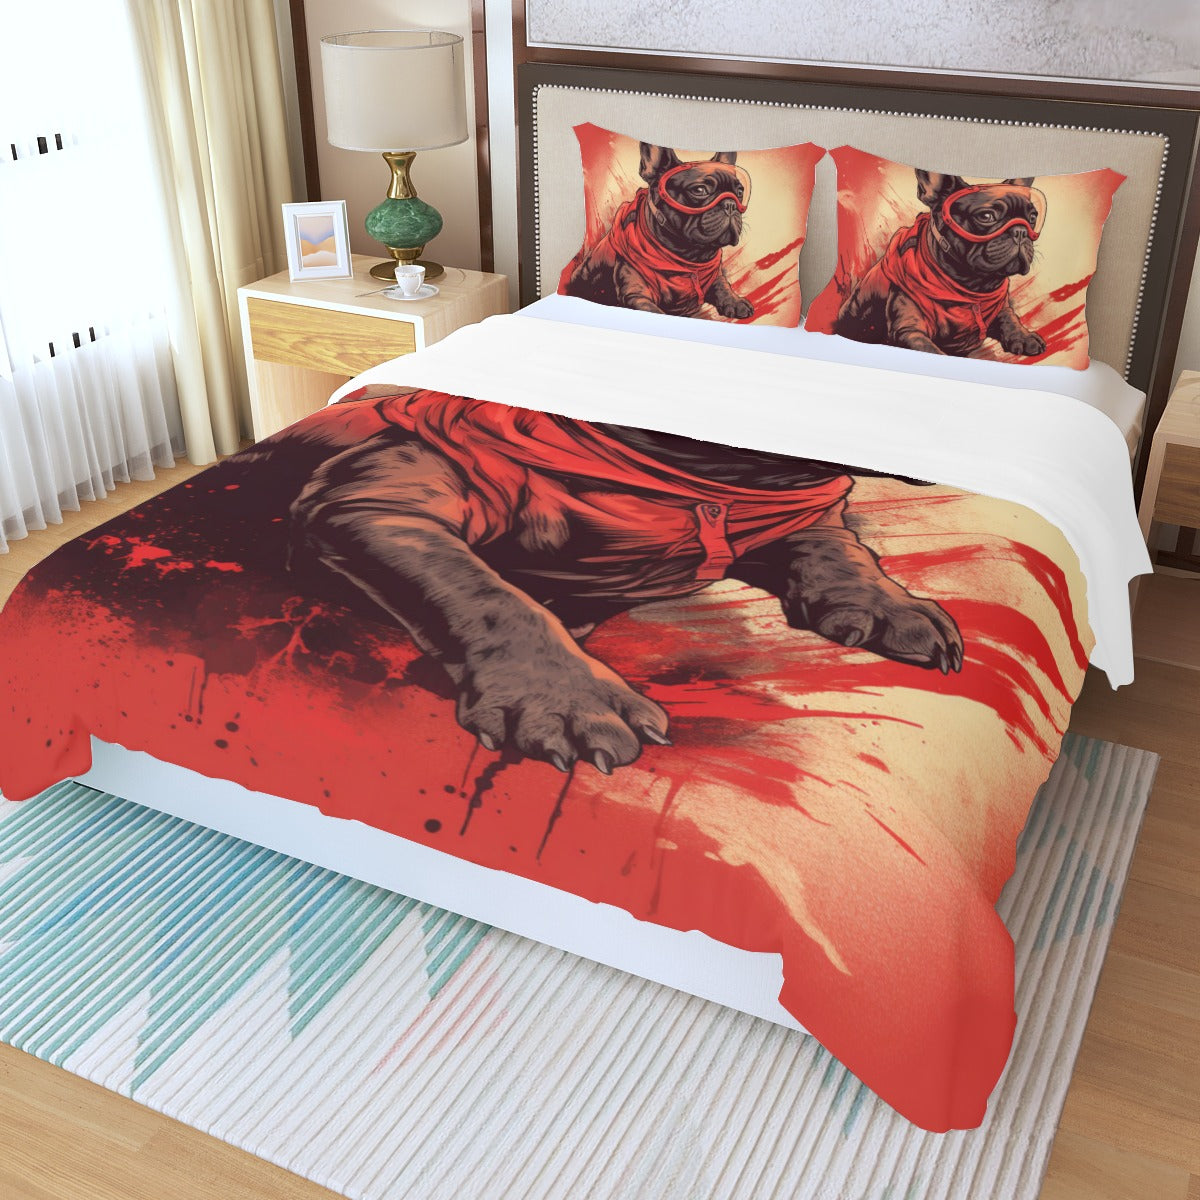 Daring Frenchie Duvet Cover Set - Rest with Courage